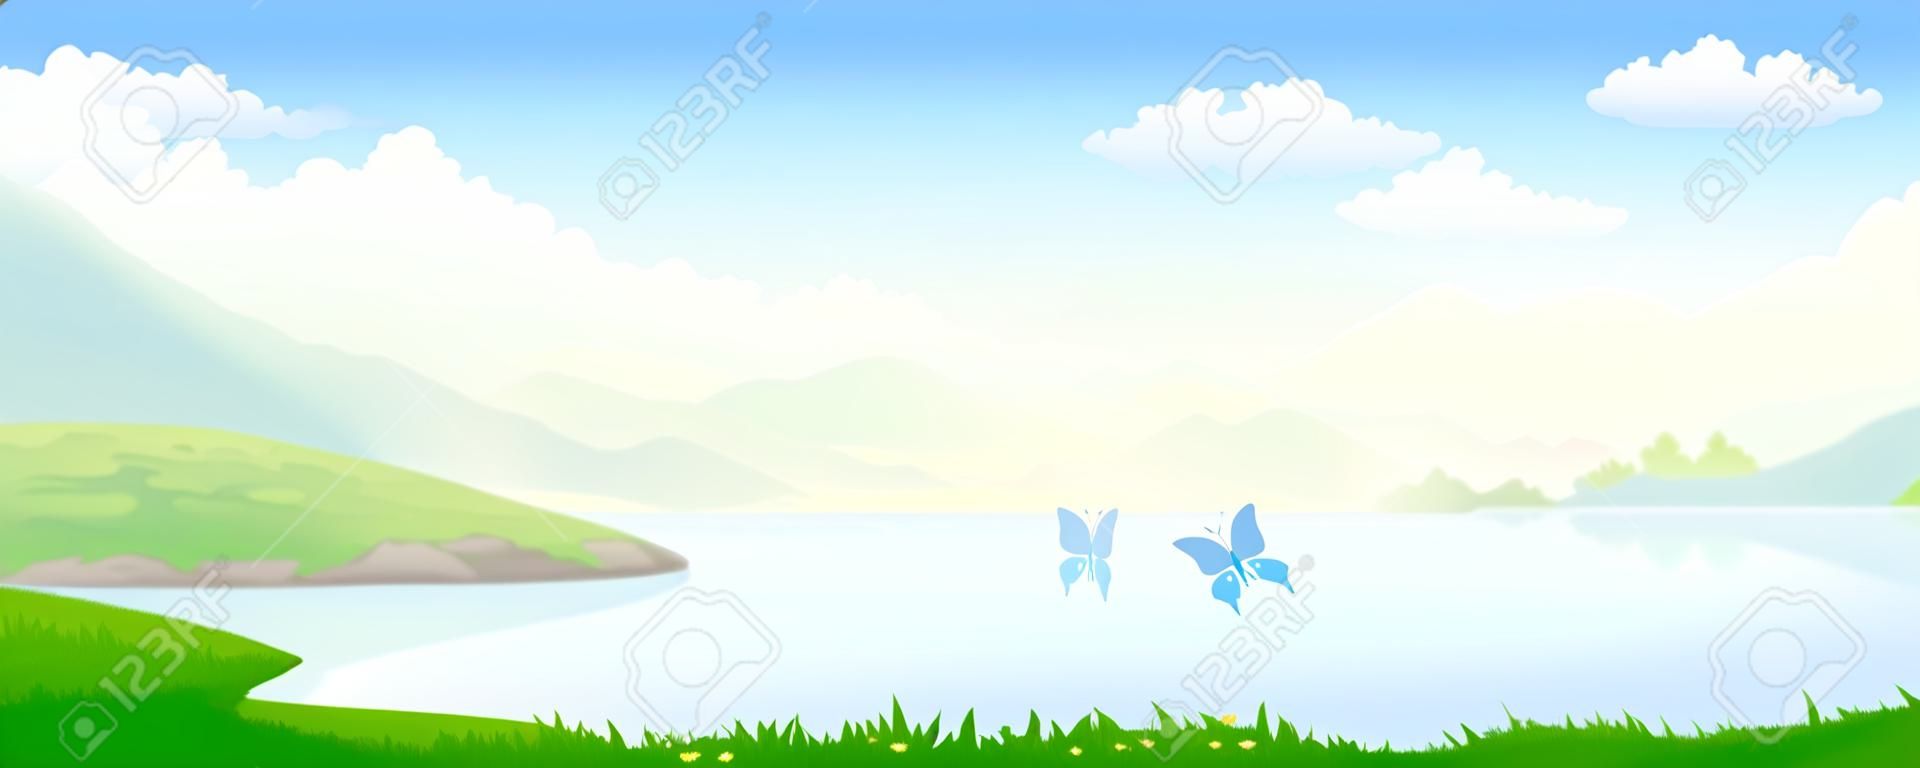 Vector illustration of a river landscape panorama